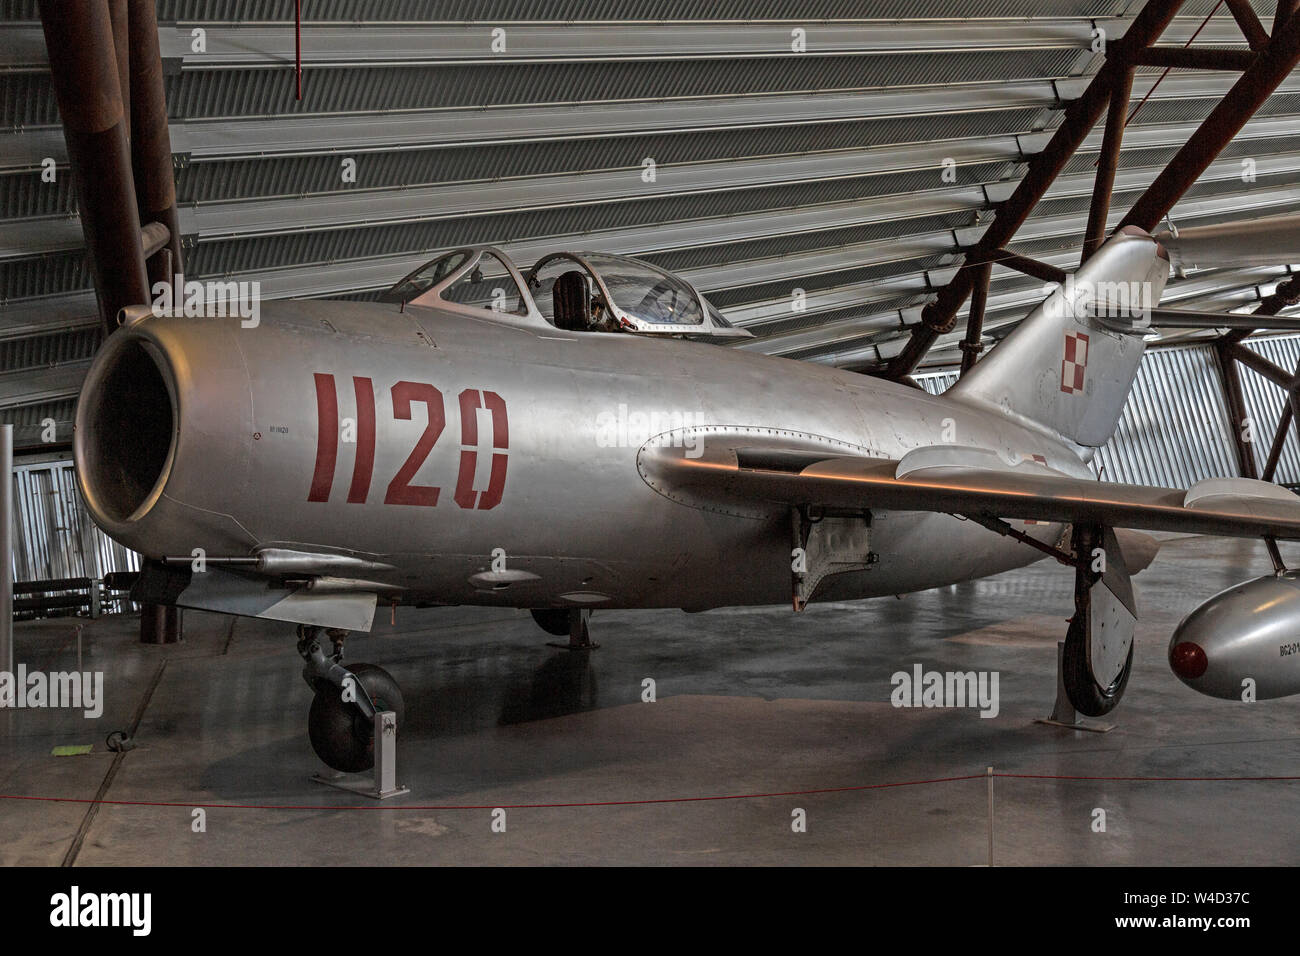 MIG-15 Russian Jet fighter, built in 1955, in the colours of th Polish Air Force. Displayed at the RAF Museum in Cosford, England. Stock Photo